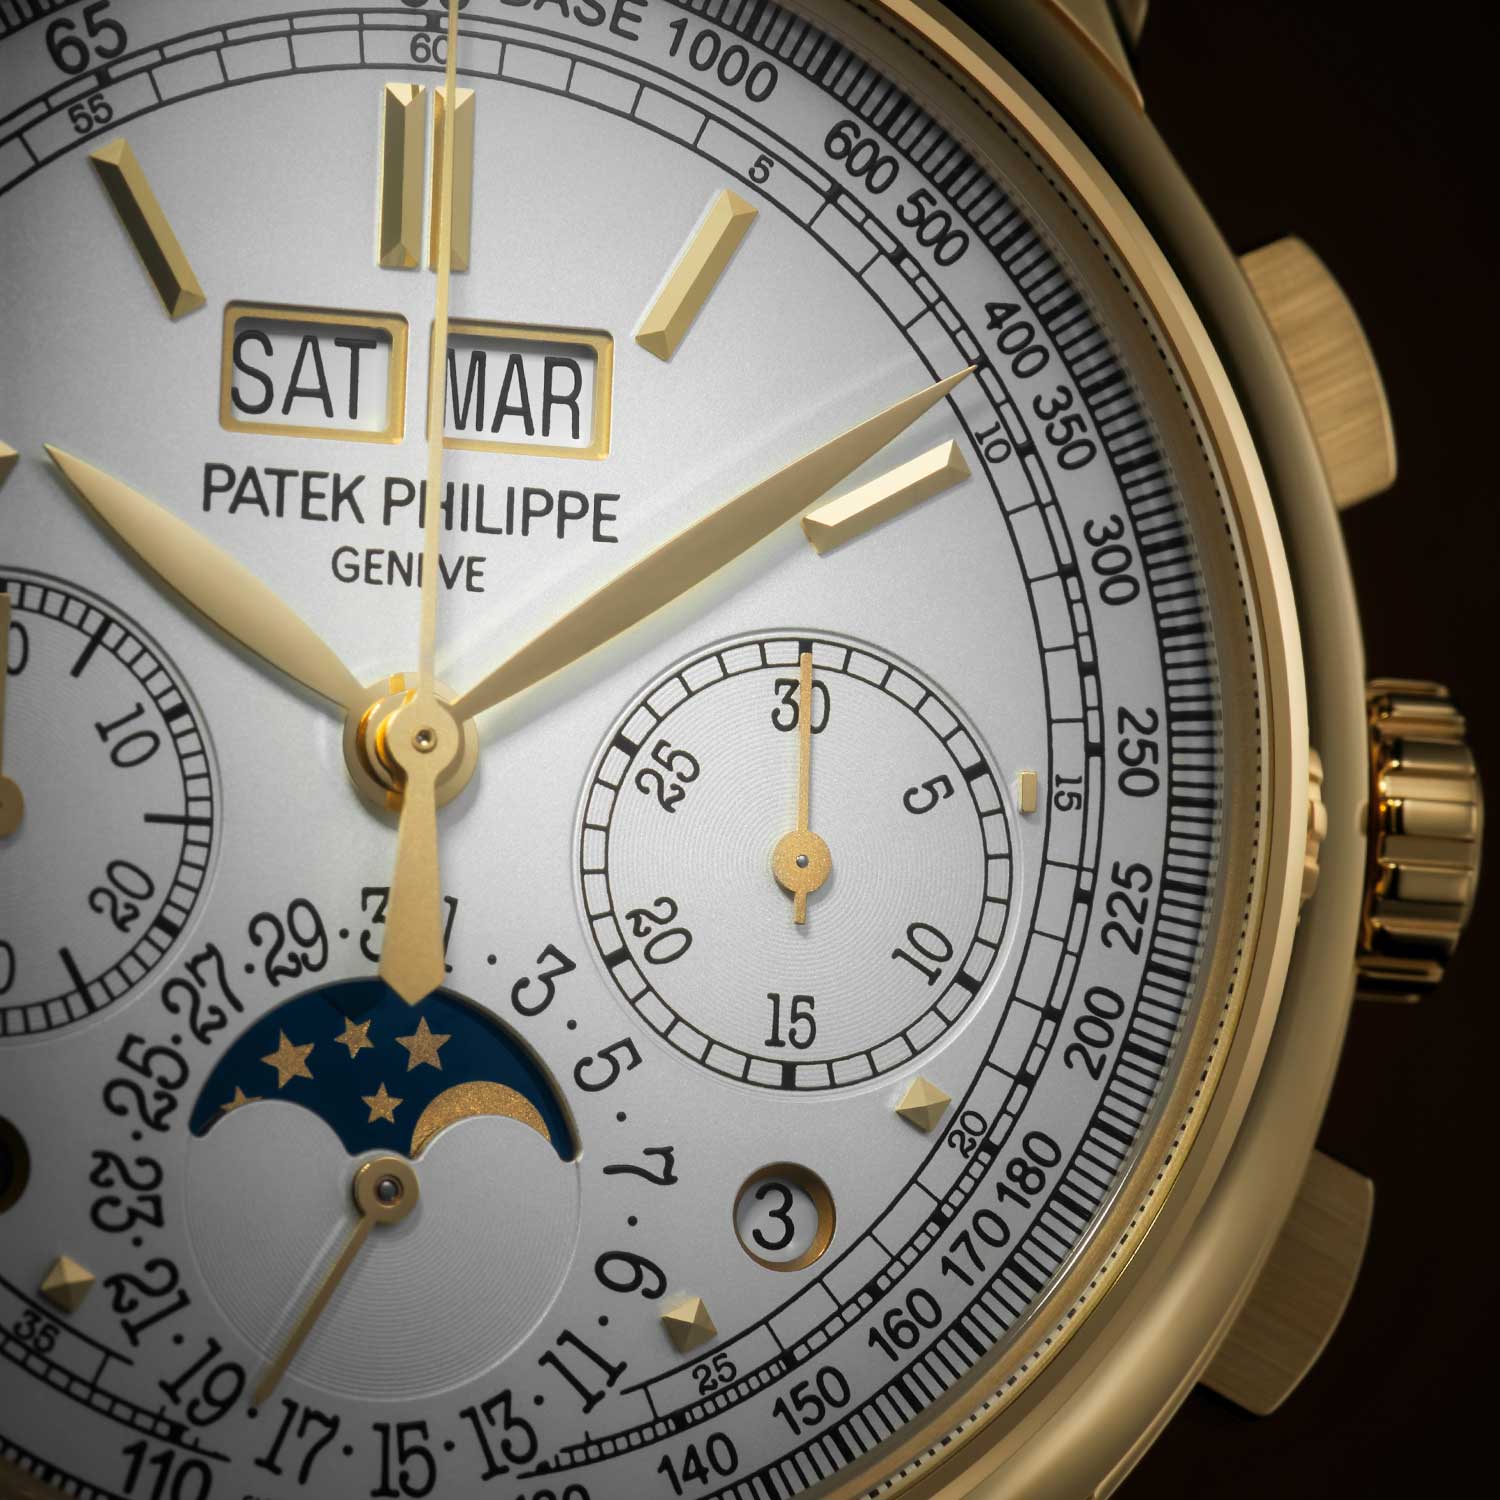 The Patek Philippe 5270 Perpetual Calendar Chronograph for the first time ever in yellow gold